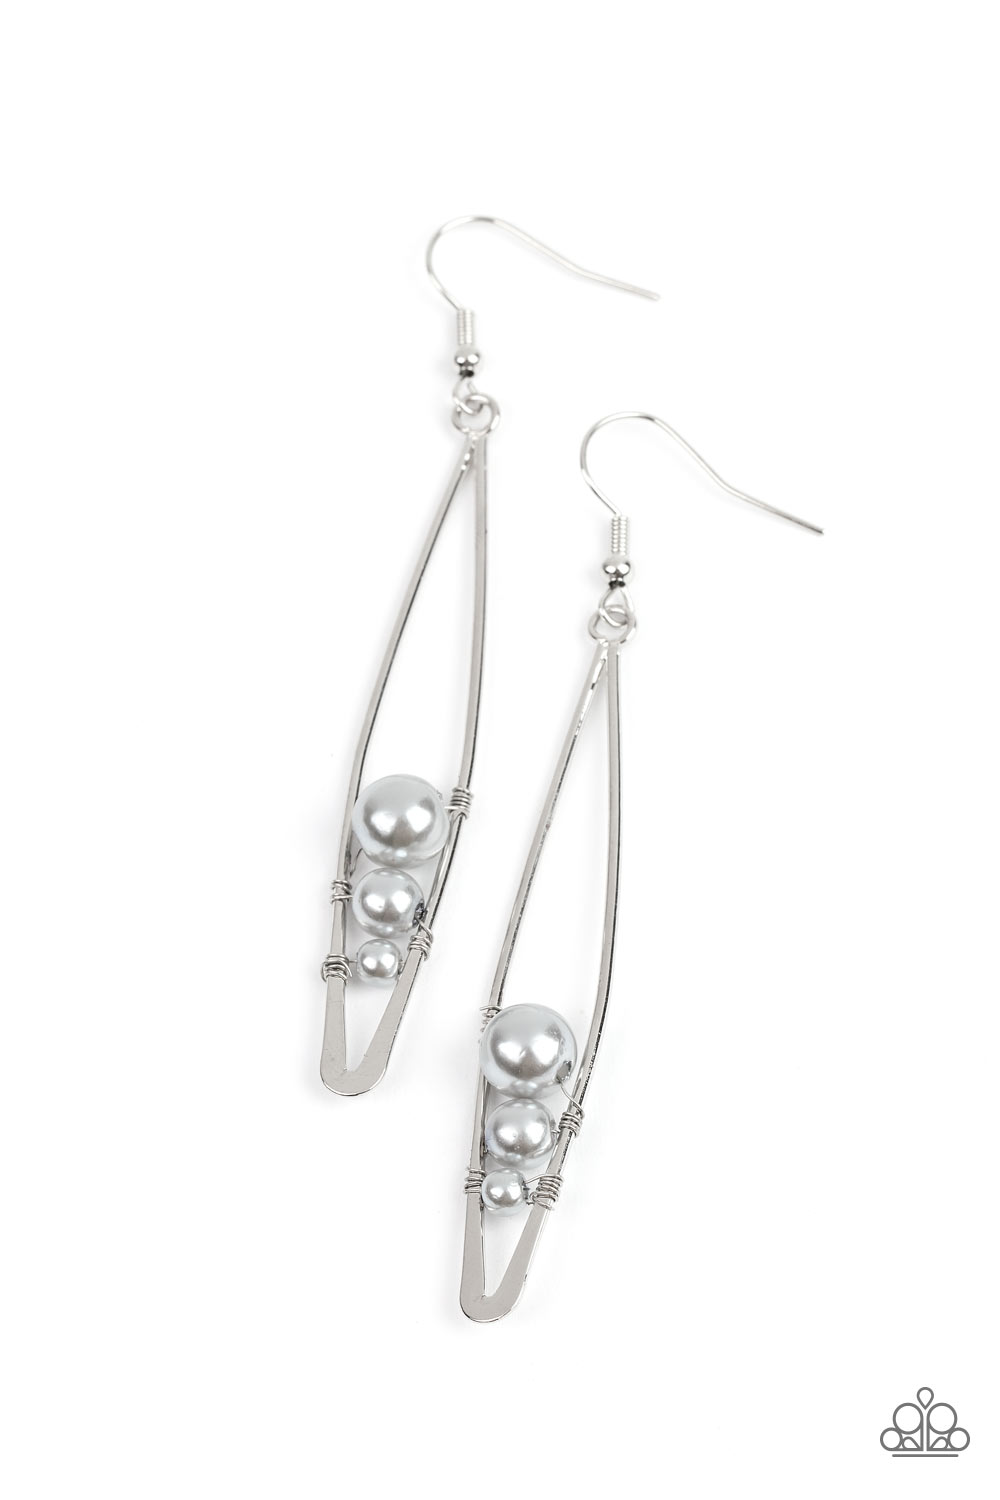 Threaded along dainty silver wires, shimmery gray pearls decrease in size as they tumble down the bottom of an elongated silver frame 